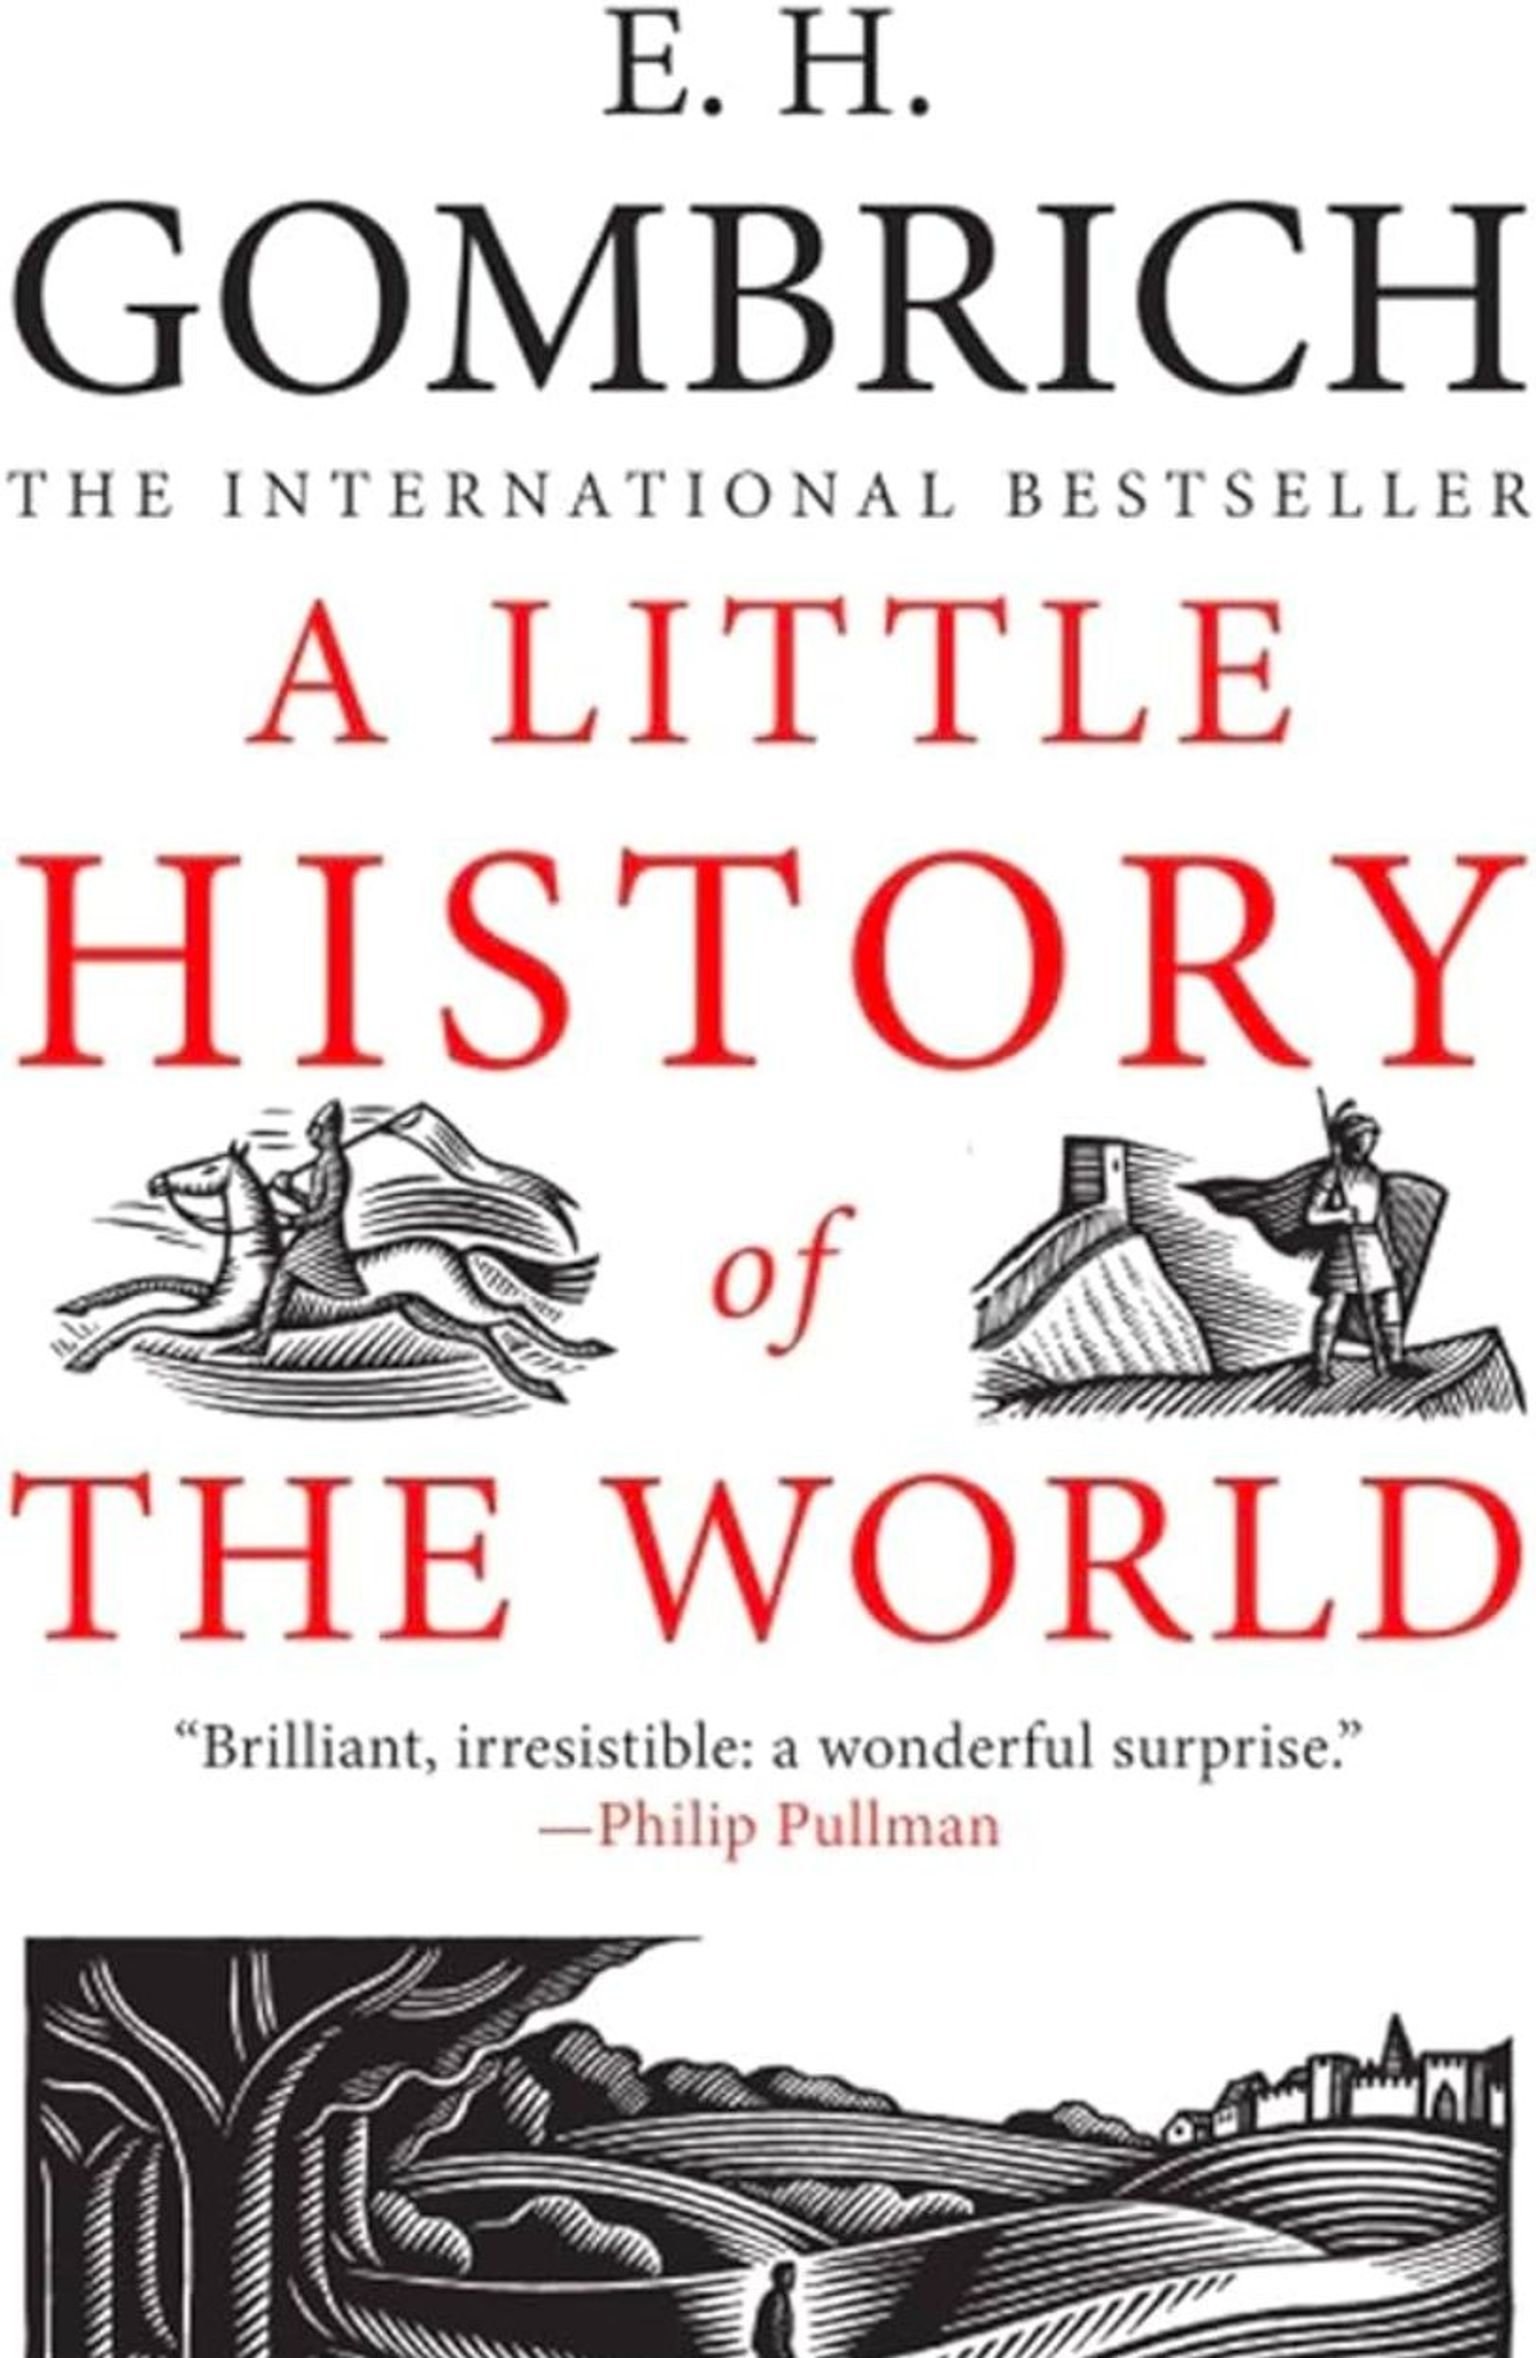 Book Recommendations - A little history of the world